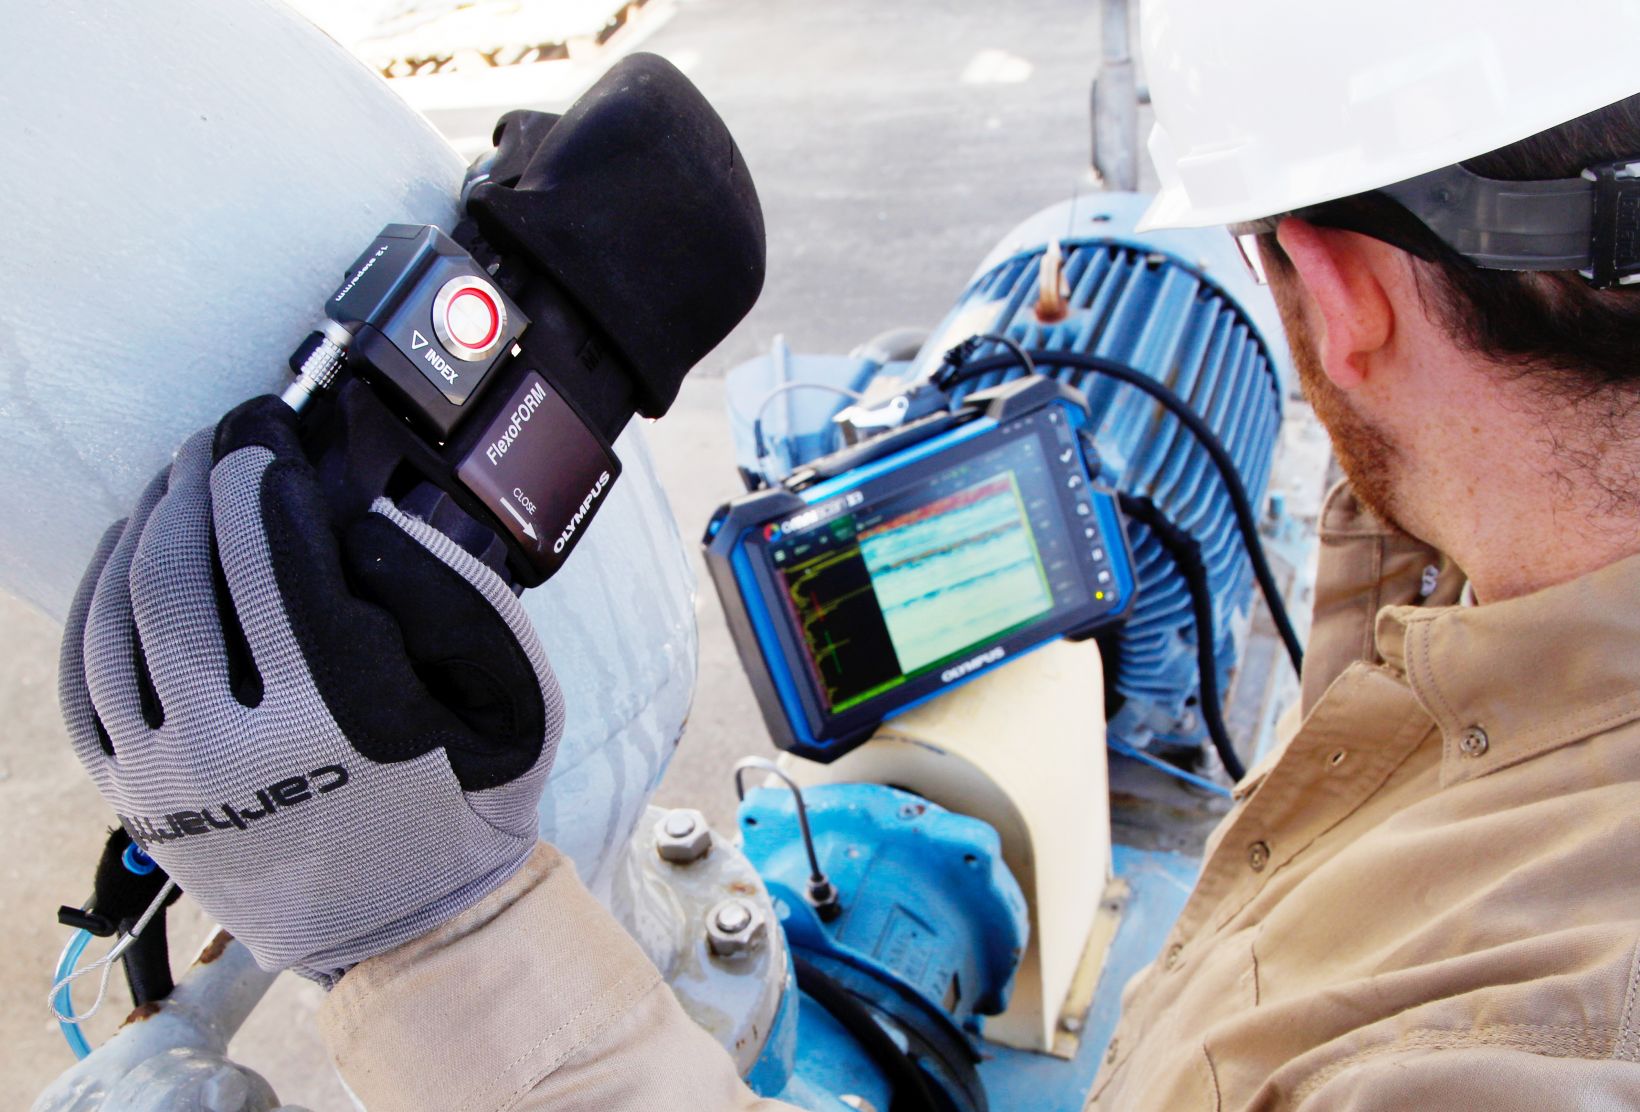 FlexoFORM ultrasonic testing scanner used by an inspector on a pipe elbow with an OmniScan X3 flaw detector